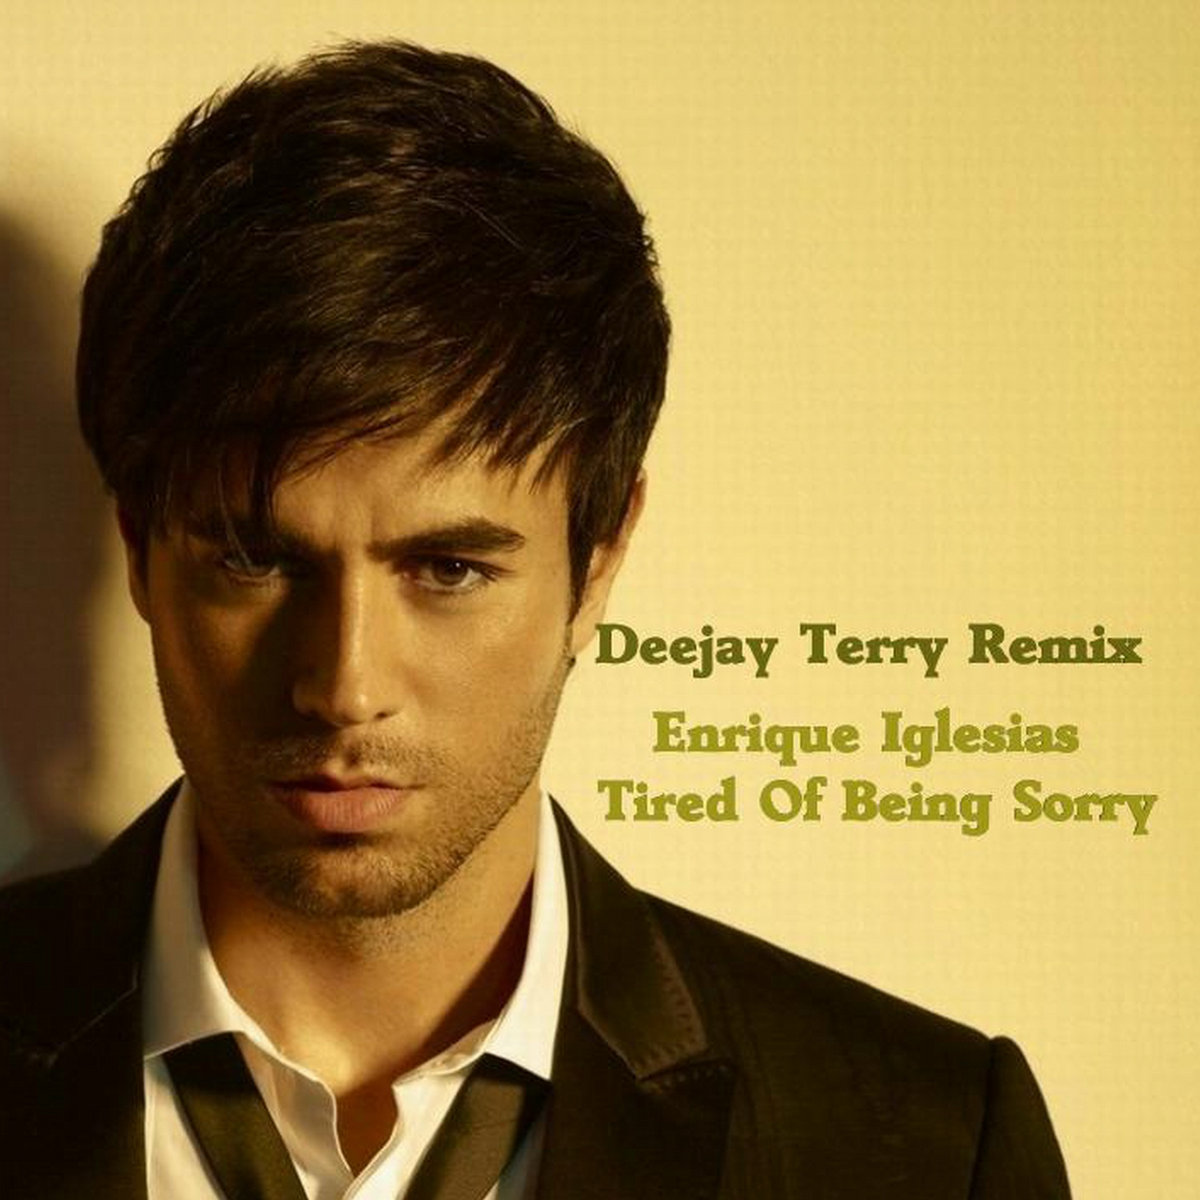 Tired Of Being Sorry (Deejay Terry Remix) | Deejay Terry